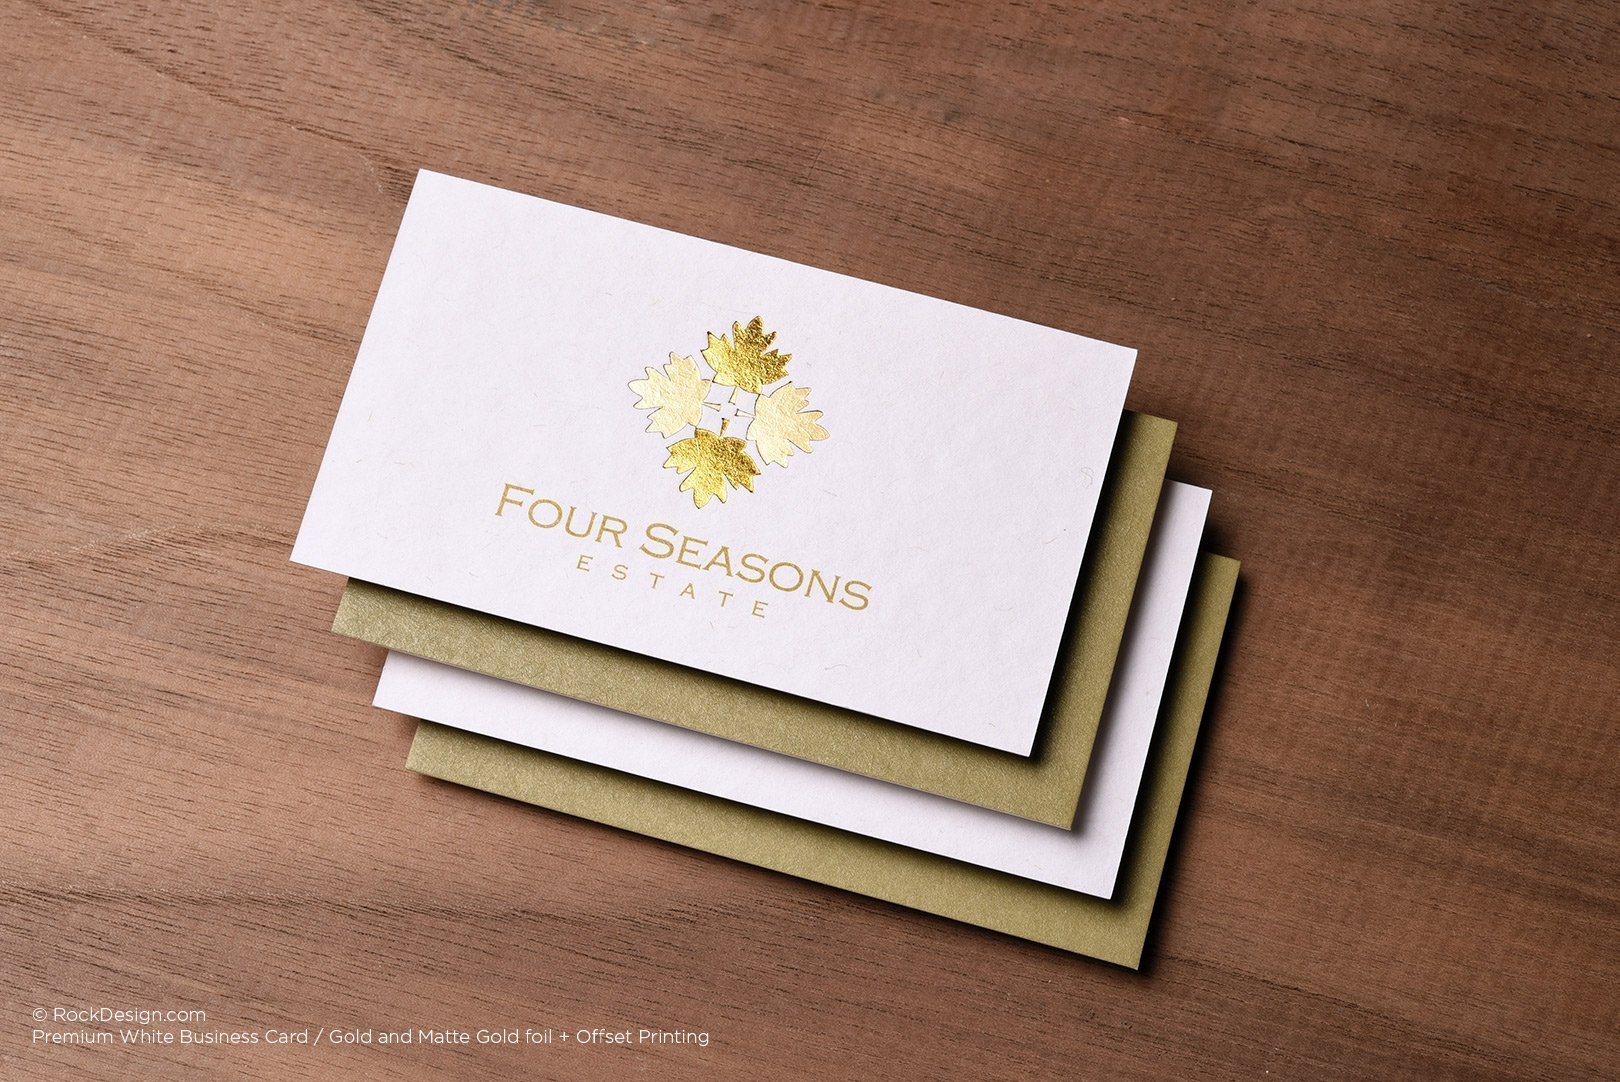 Premium Watercolor Uncoated Finish Business Cards